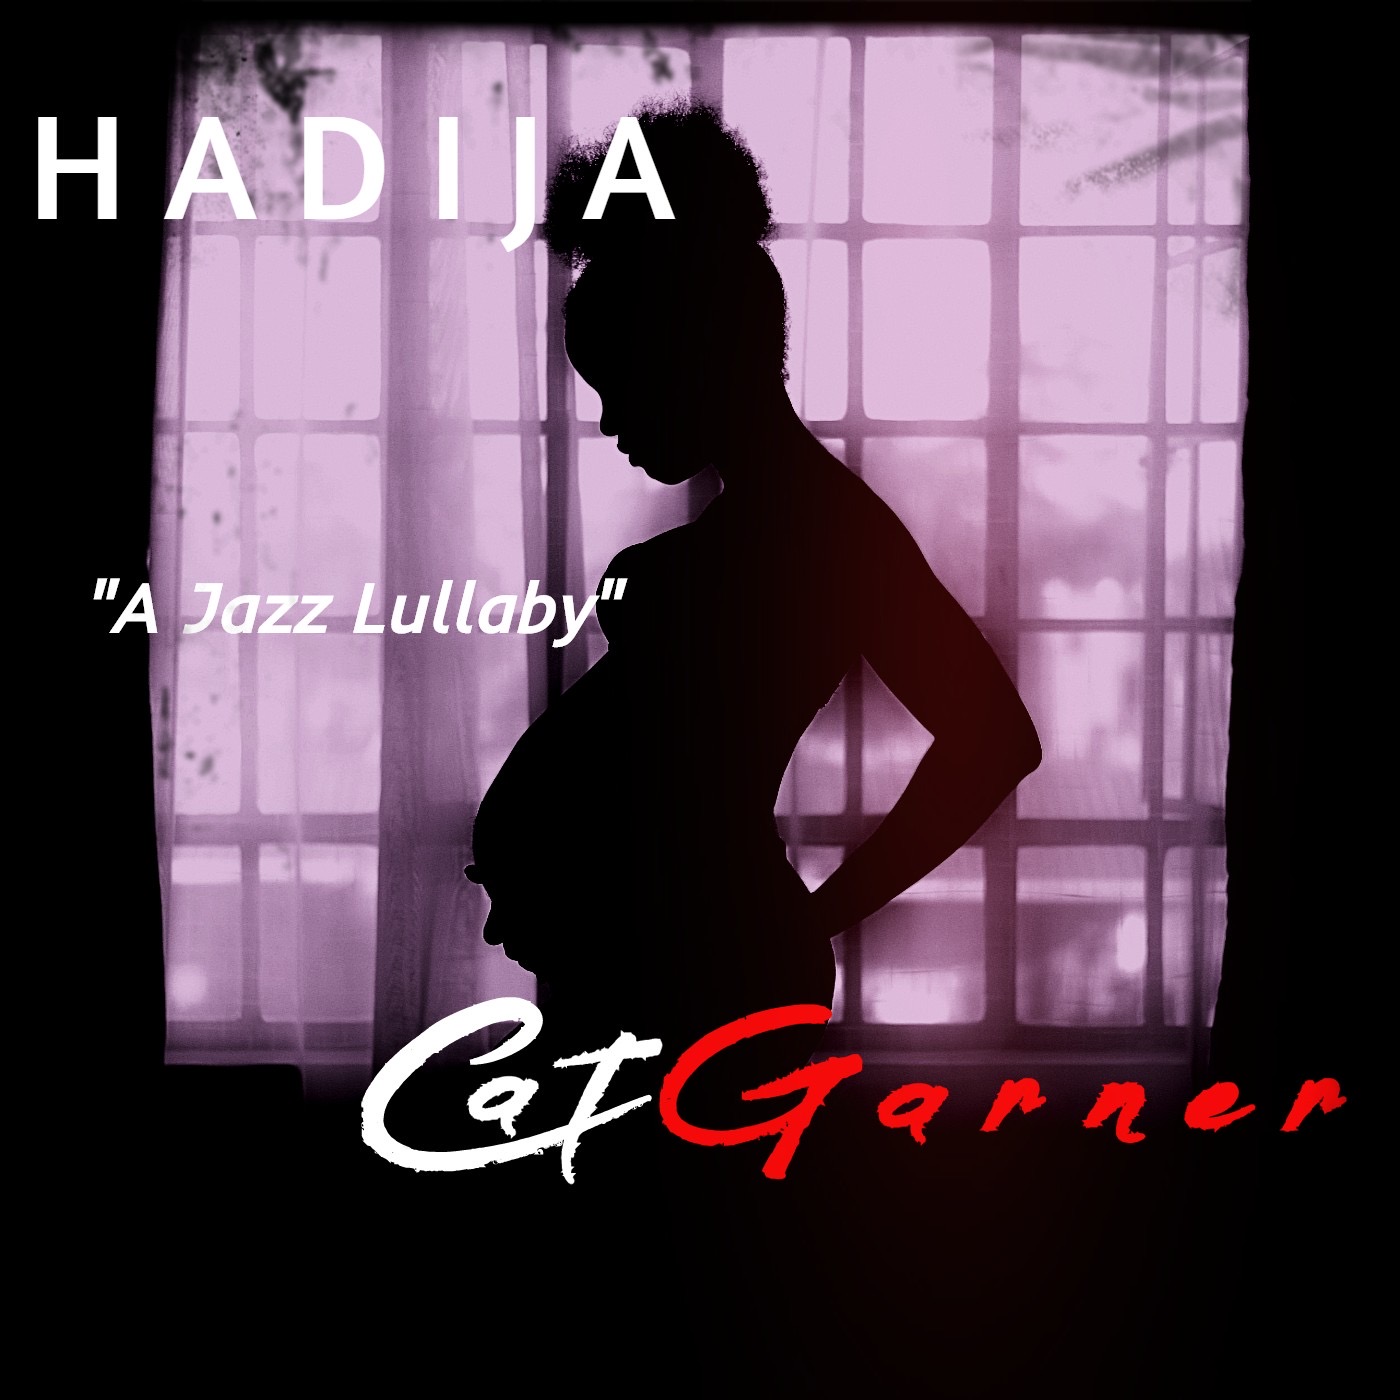 HADIJA featuring Cat Garner is a beautiful jazz lullaby available on Spotify and other digital platforms